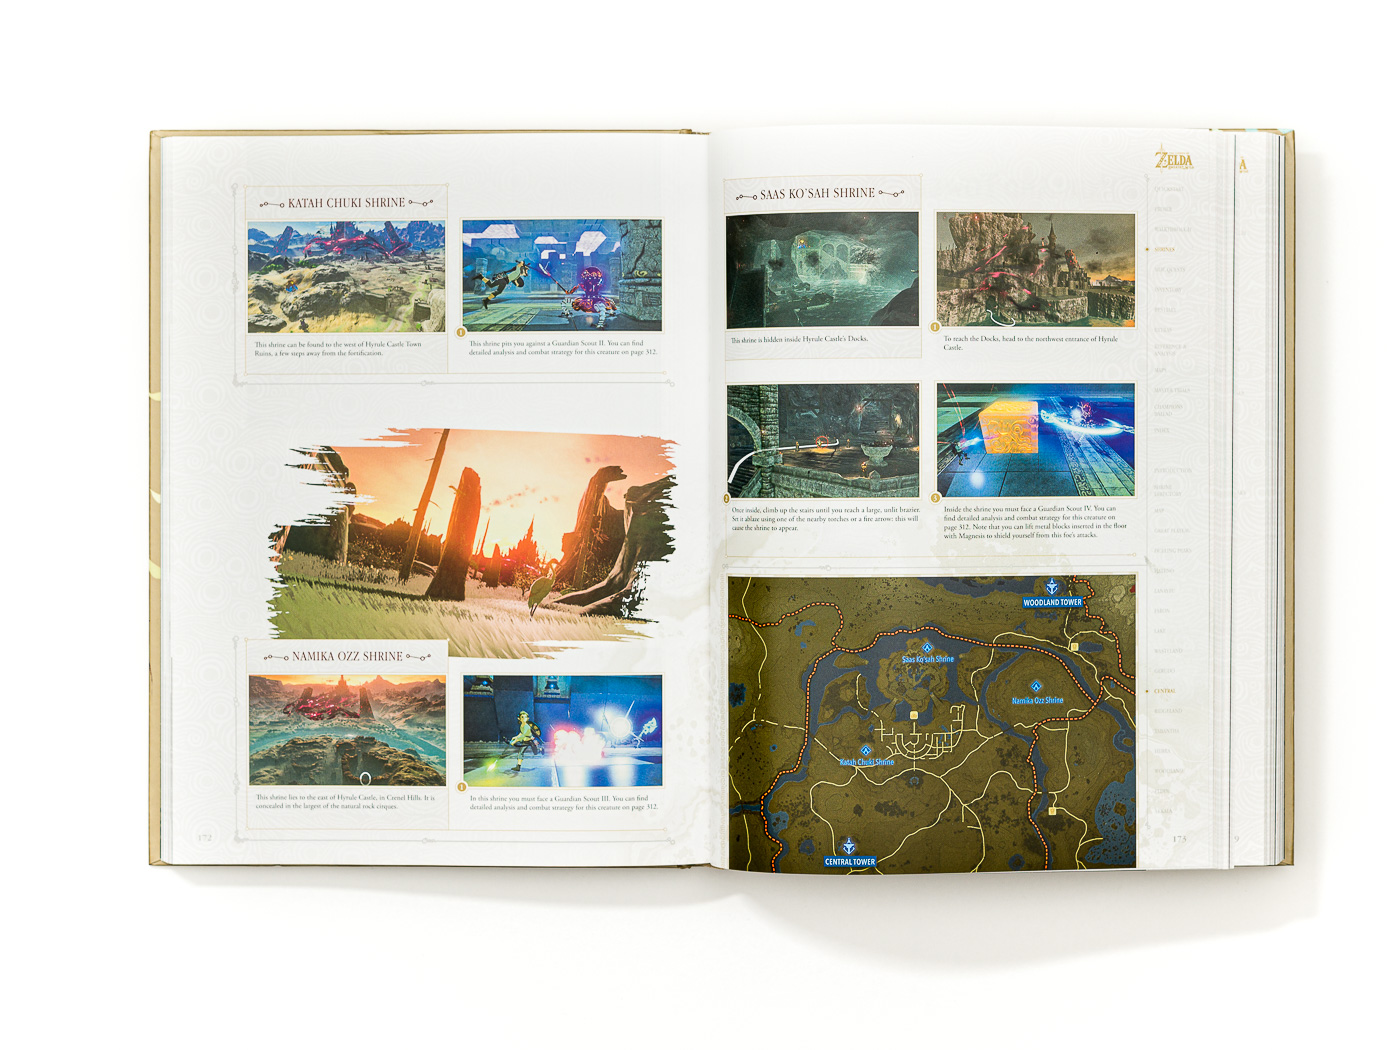 Piggyback على X: Proud to announce the imminent arrival of The Legend of  Zelda: Breath of the Wild complete guide in 3 editions. Pre-order your copy  now.  / X